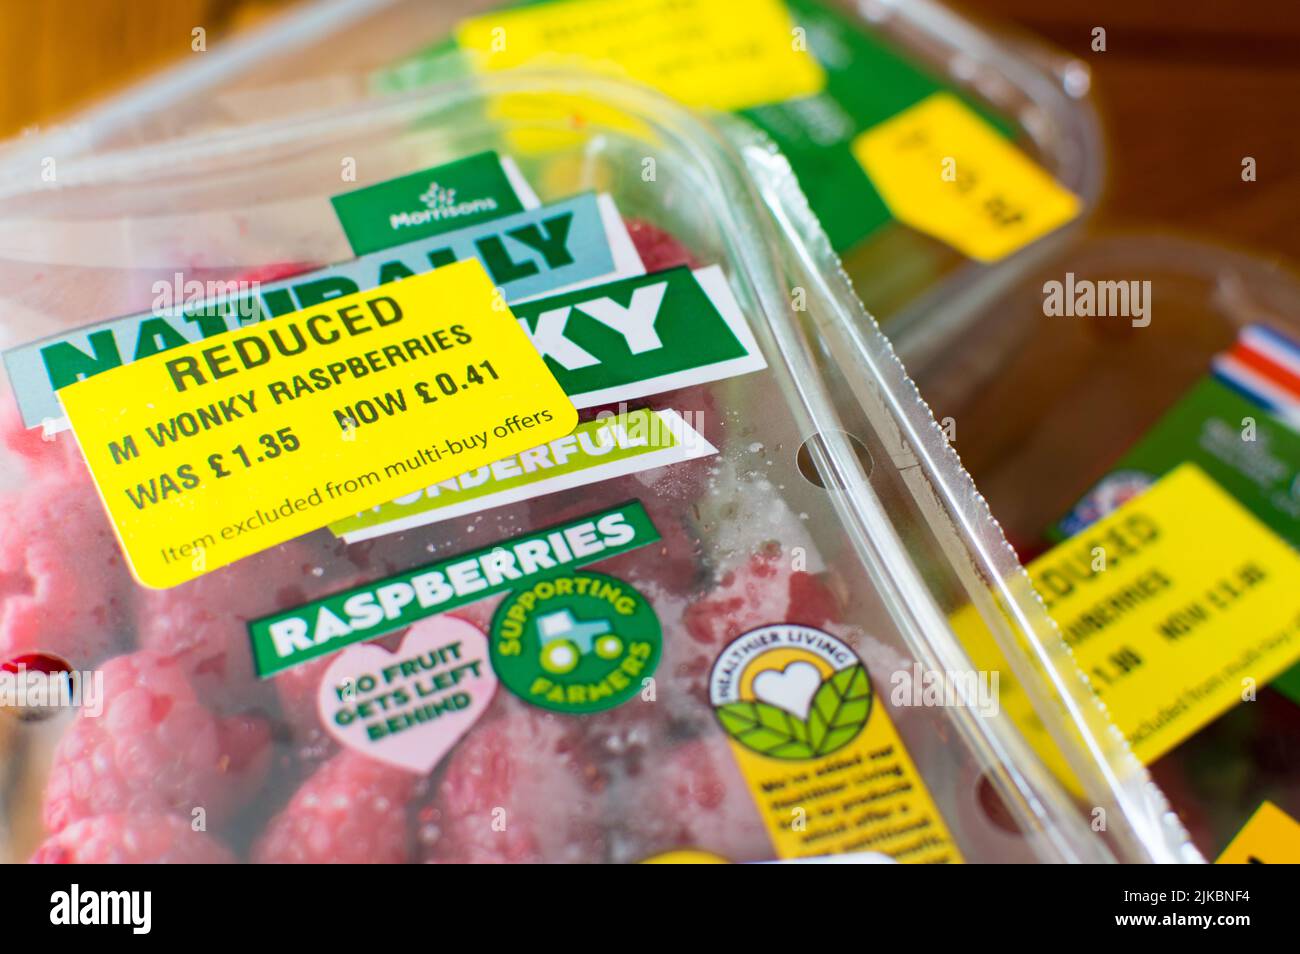 Yellow sticker labelled fruits in supermarket to reduce food waste Stock Photo